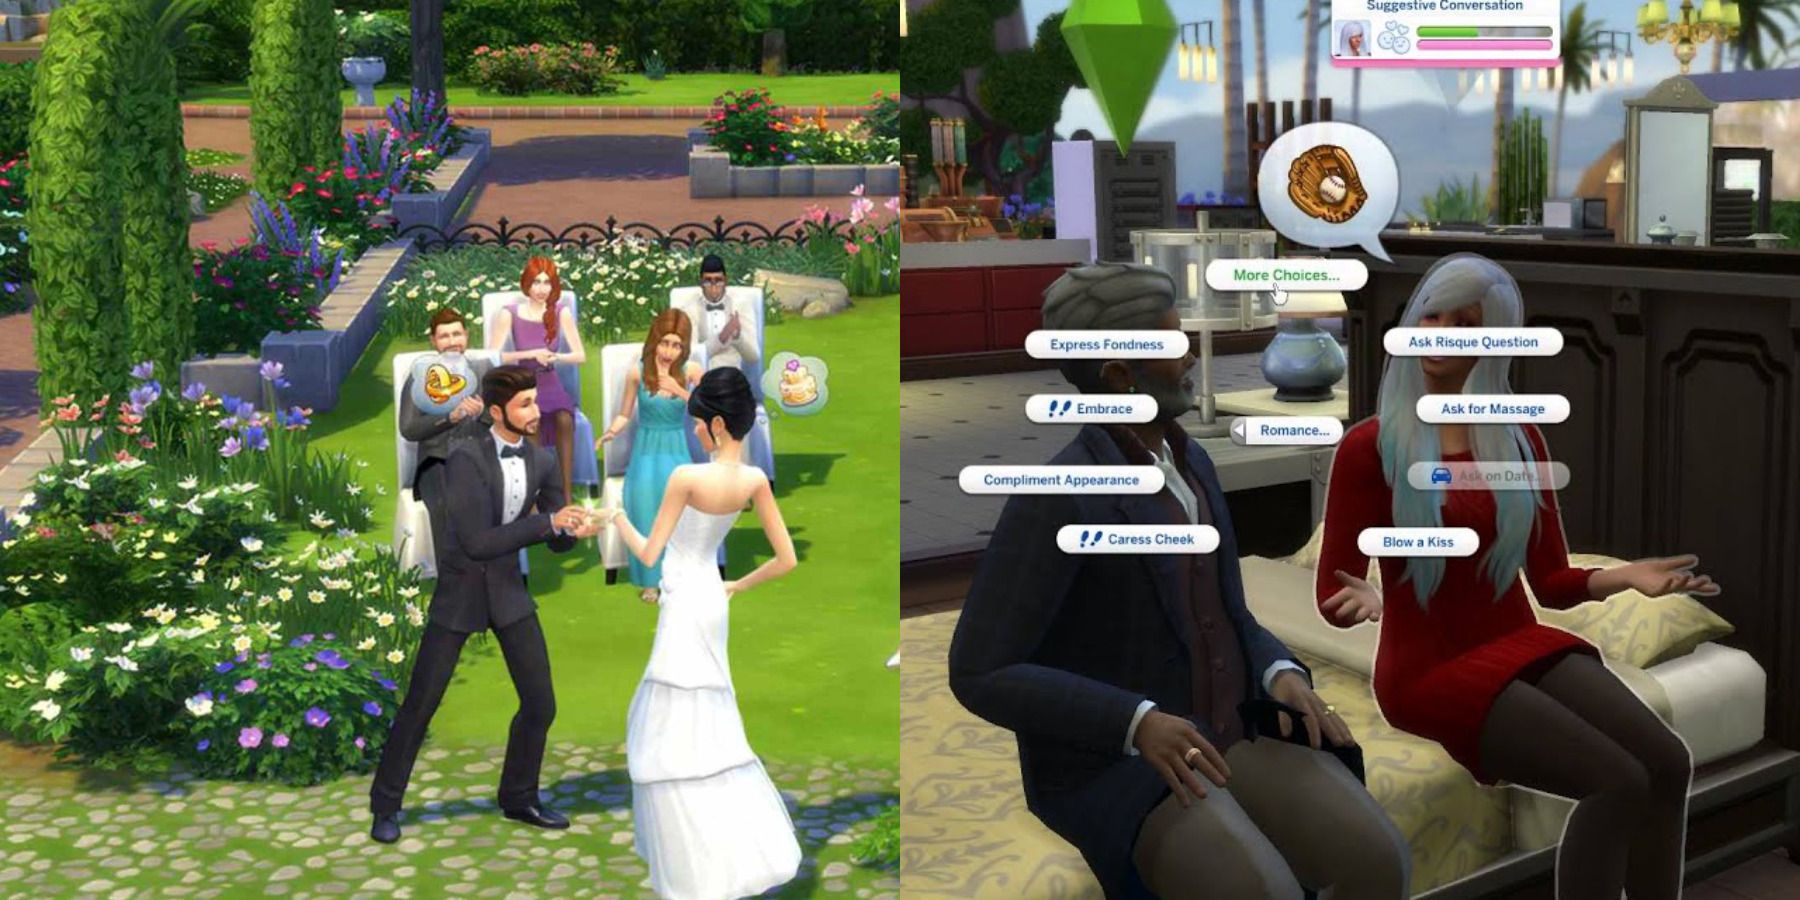 Sims 4 social events feature split image wedding and a date